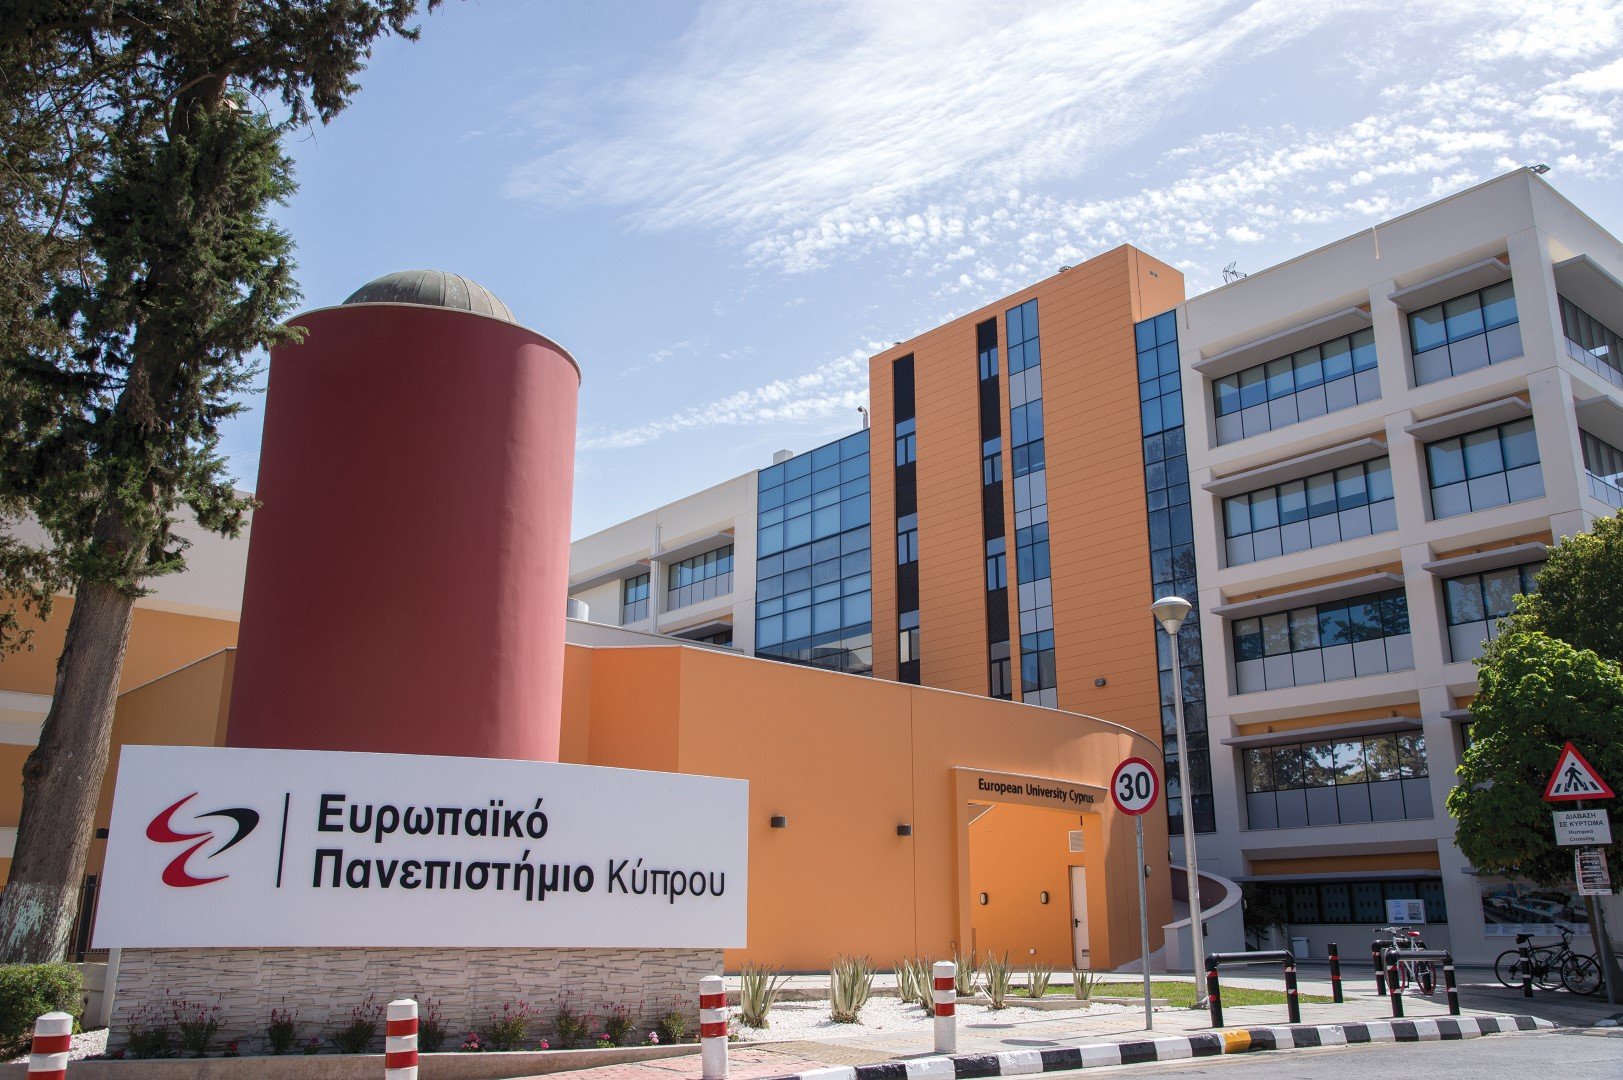 New Erasmus charter for higher education 2021-2027 at the European University of Cyprus